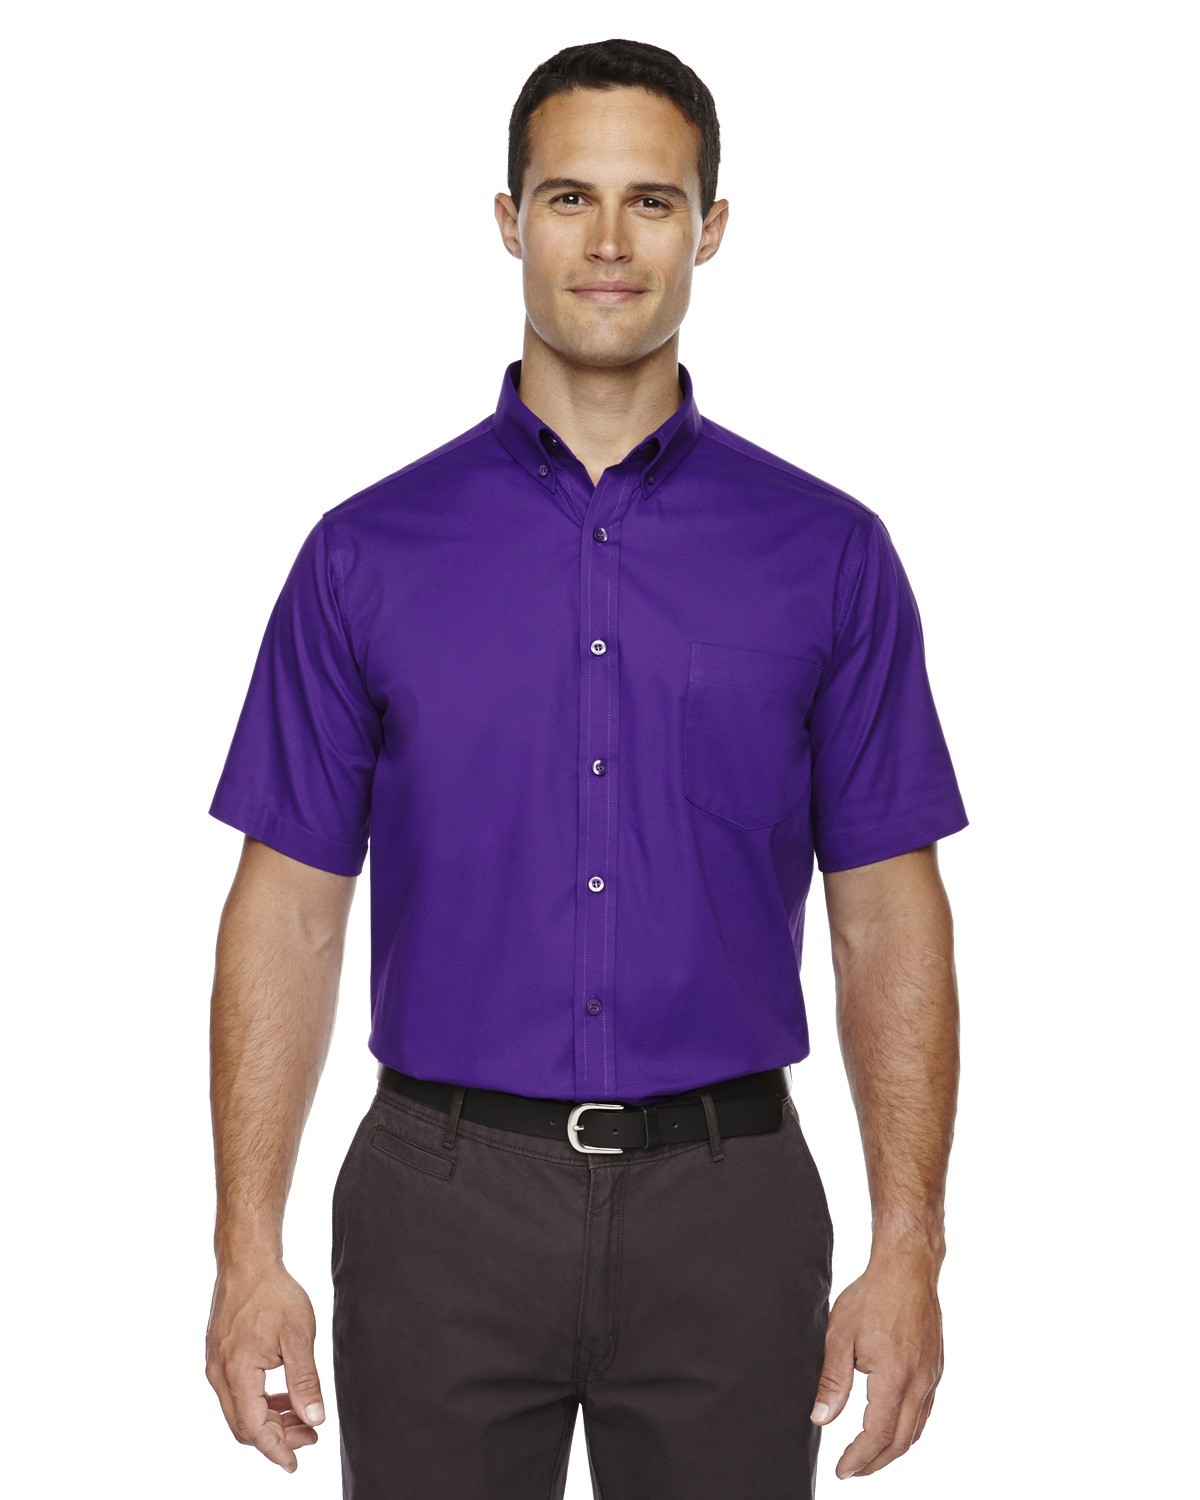 Selected Color is Campus Prple 427